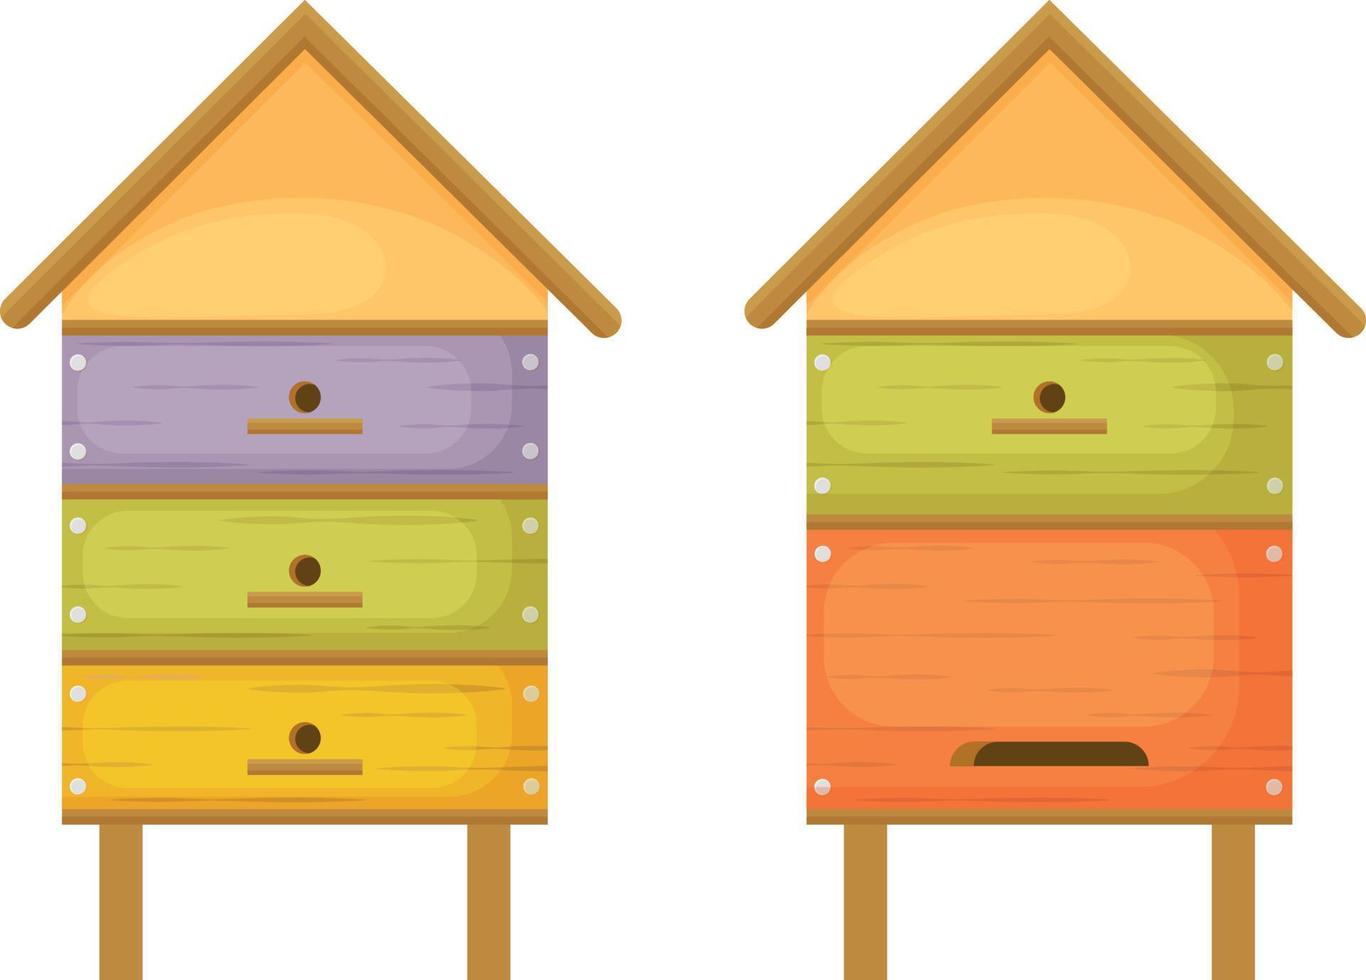 Hive. Bee hives. Two wooden beehives in the form of houses. Colorful beehives in cartoon style. Honeybee houses. Vector illustration isolated on a white background